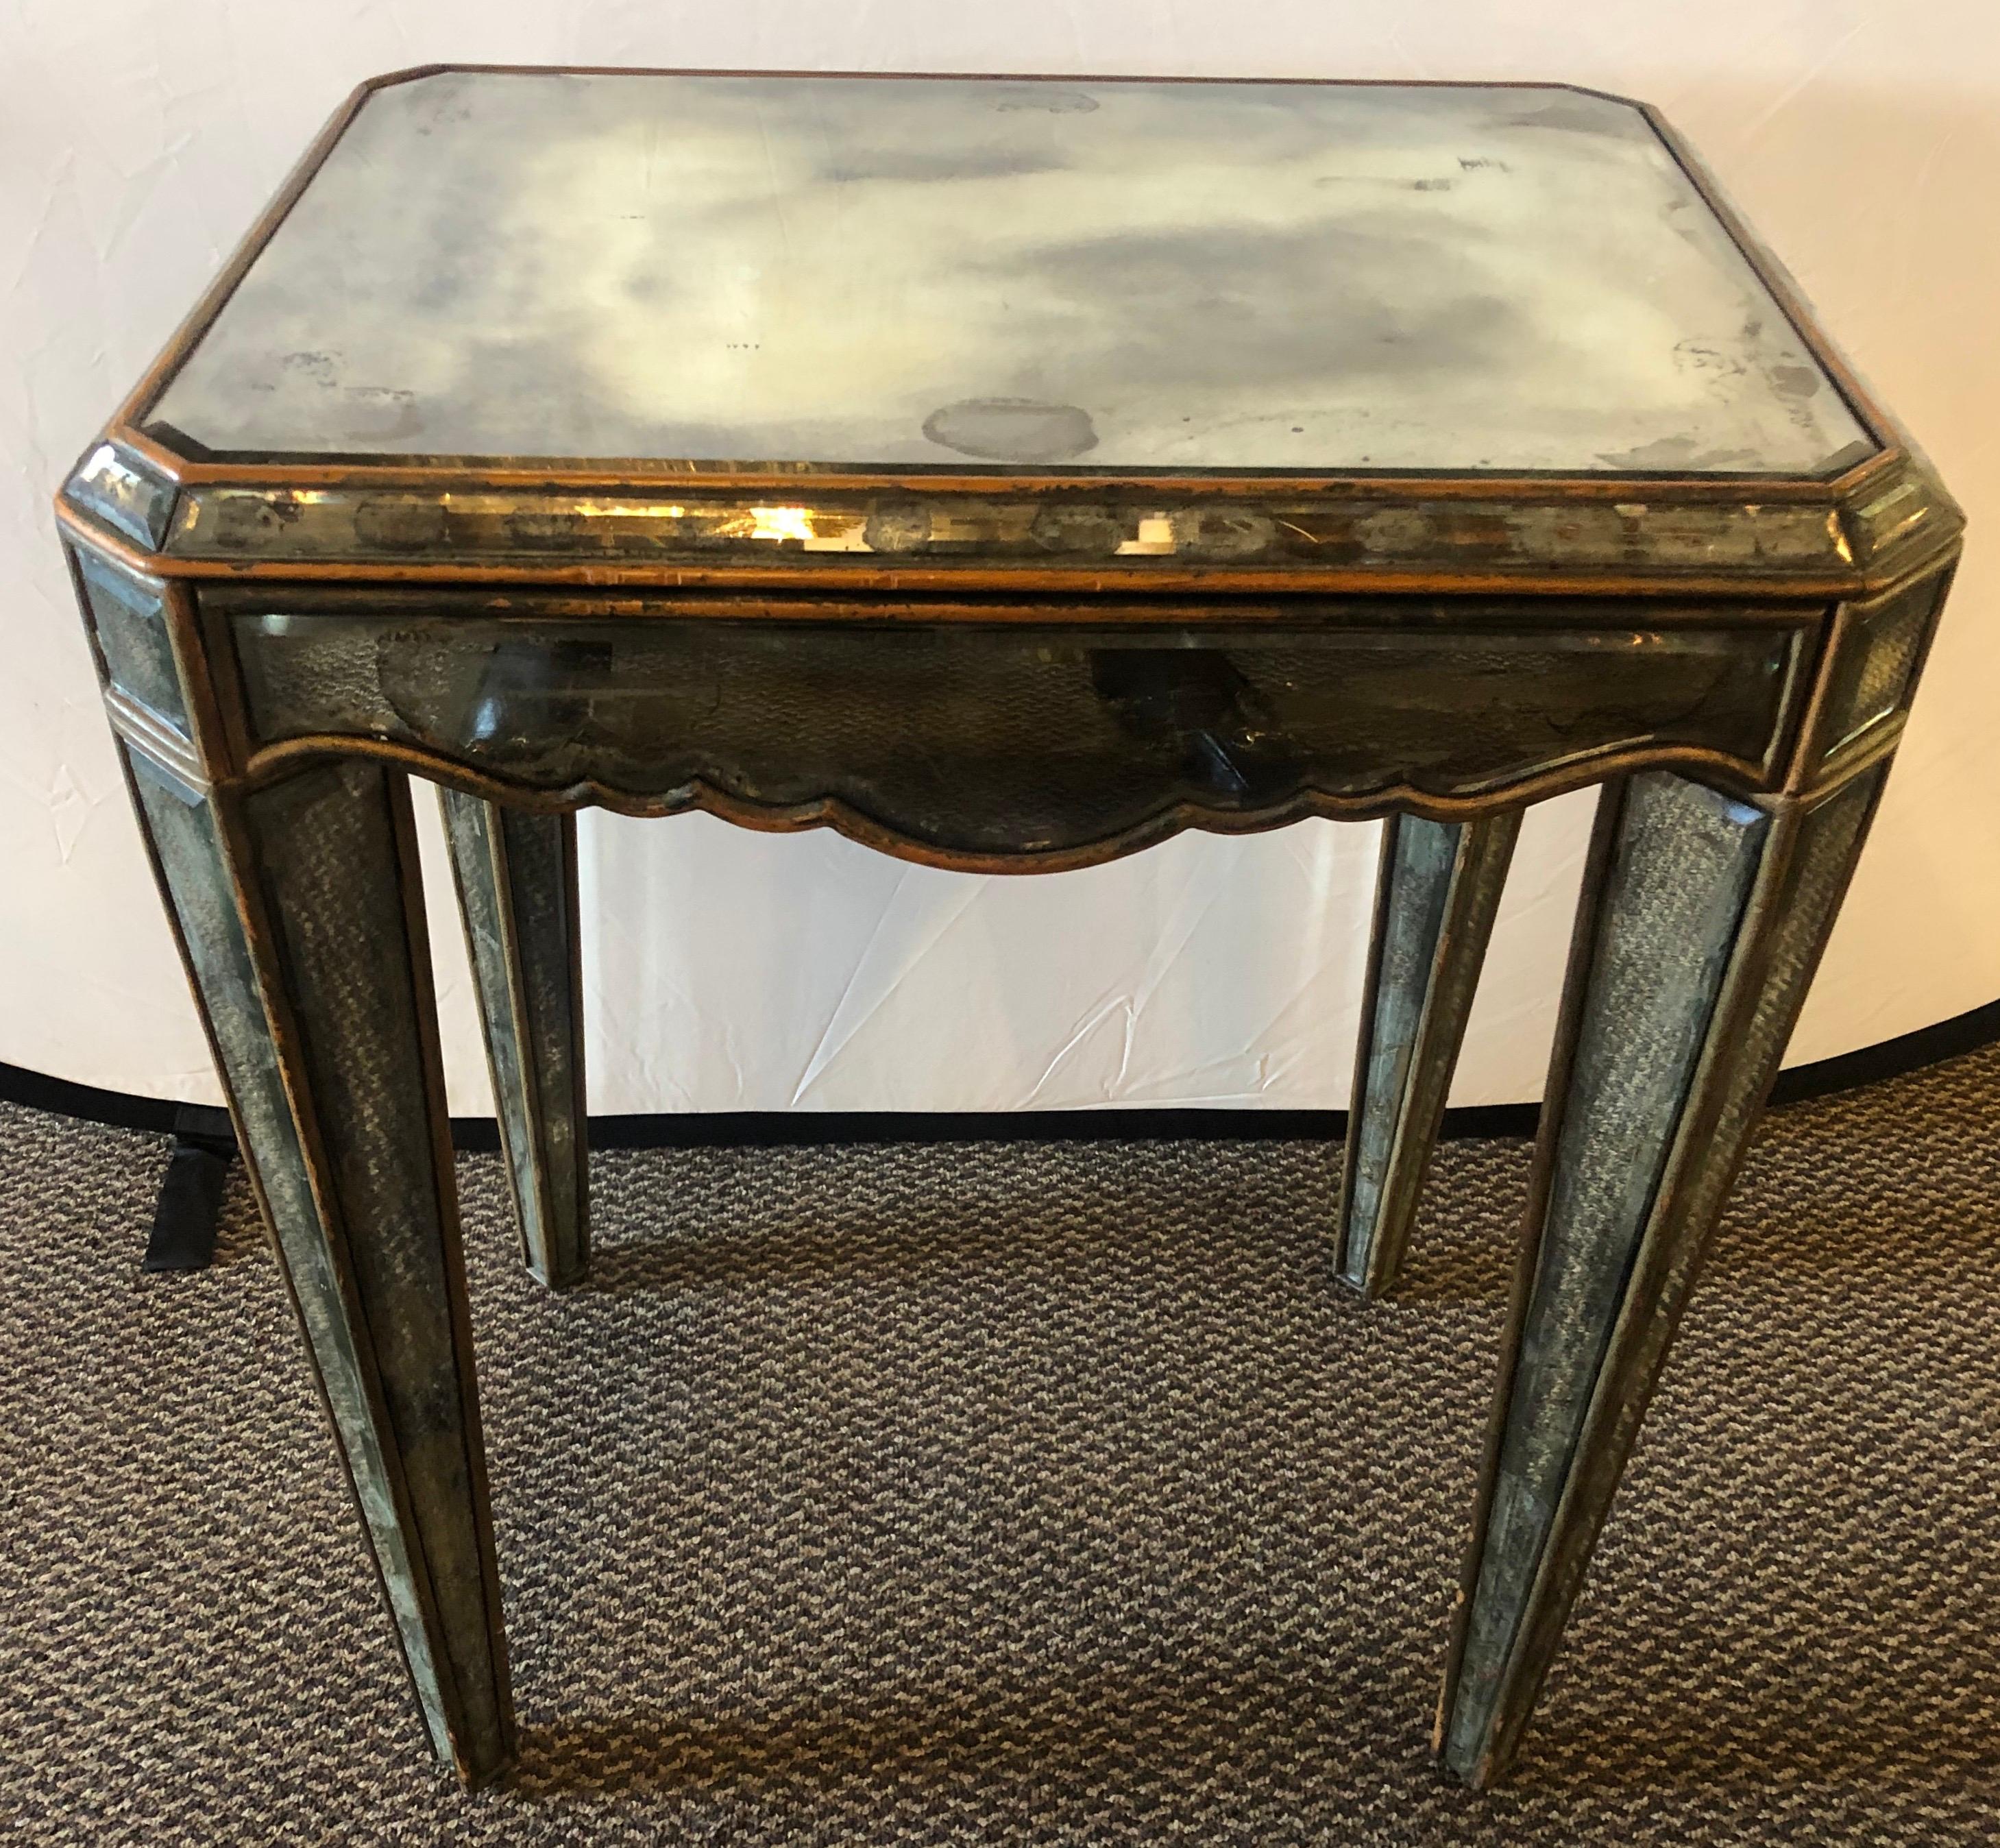 Mid-Century Modern distressed beveled mirror single draw end, side table or desk. An old wooden beveled mirror ladies writing desk, nightstand or side end table. This stunning all mirrored versatile piece is simply fantastic. The leaning tapering